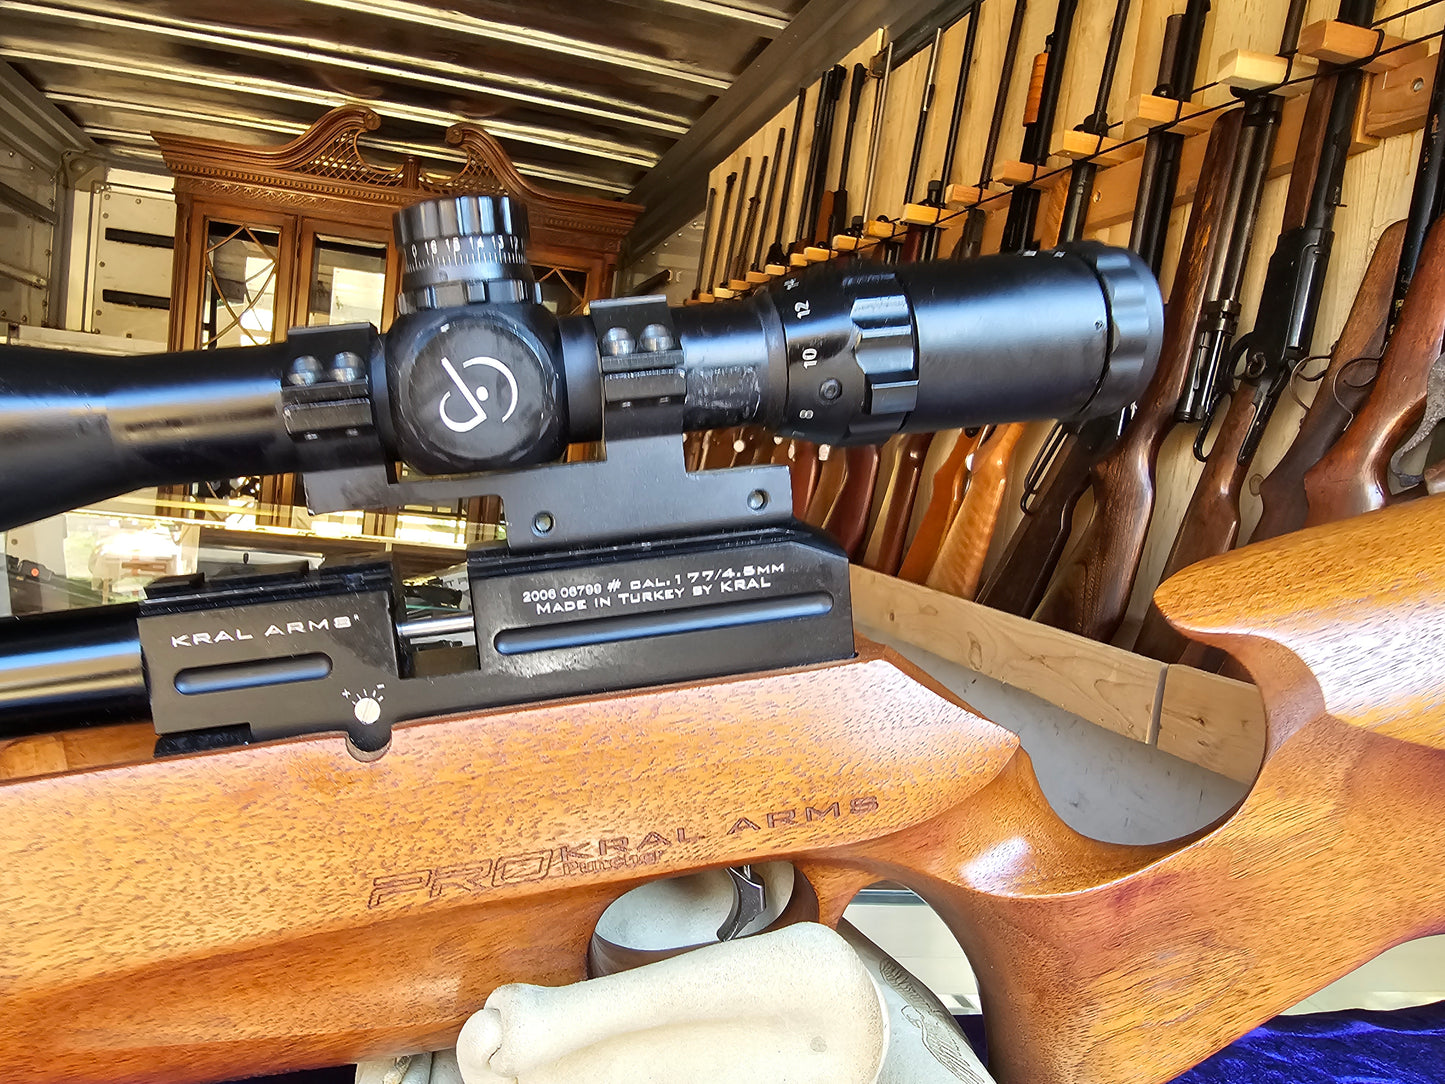 Kral Arms Pro 500 .177 Cal (Scope not Included)